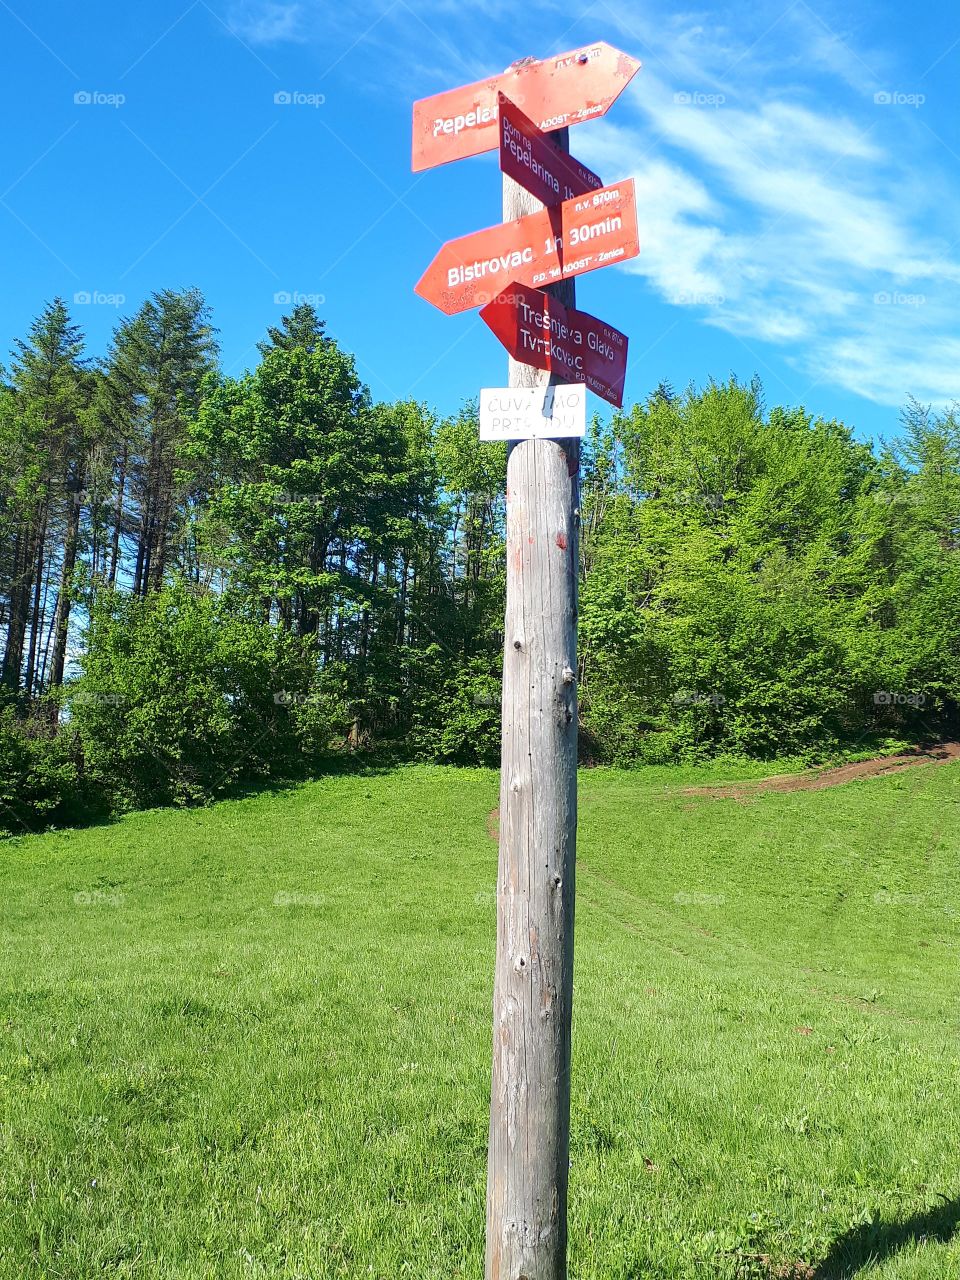 A guidepost on the hill, in a clean area surrounded by forests